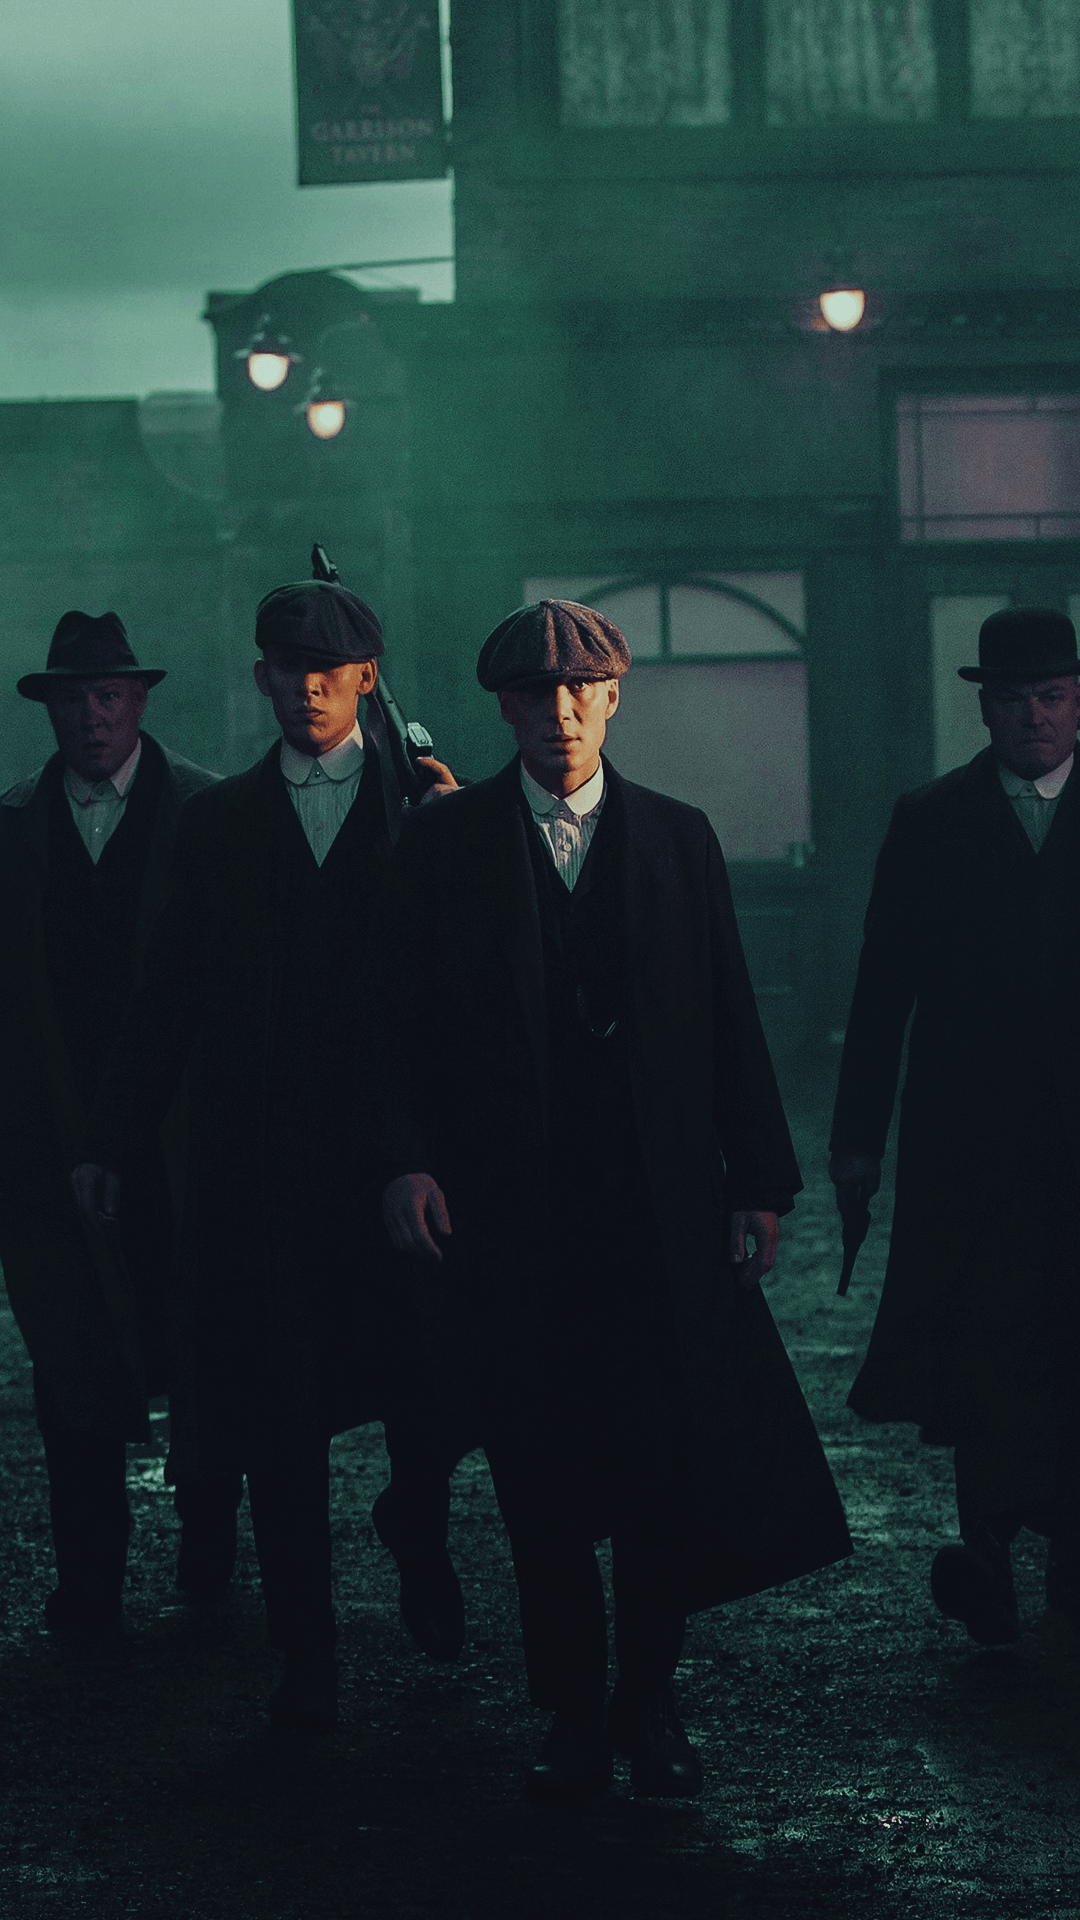 Peaky Blinders Quotes Wallpapers Top Free Peaky Blinders Quotes Backgrounds Wallpaperaccess 